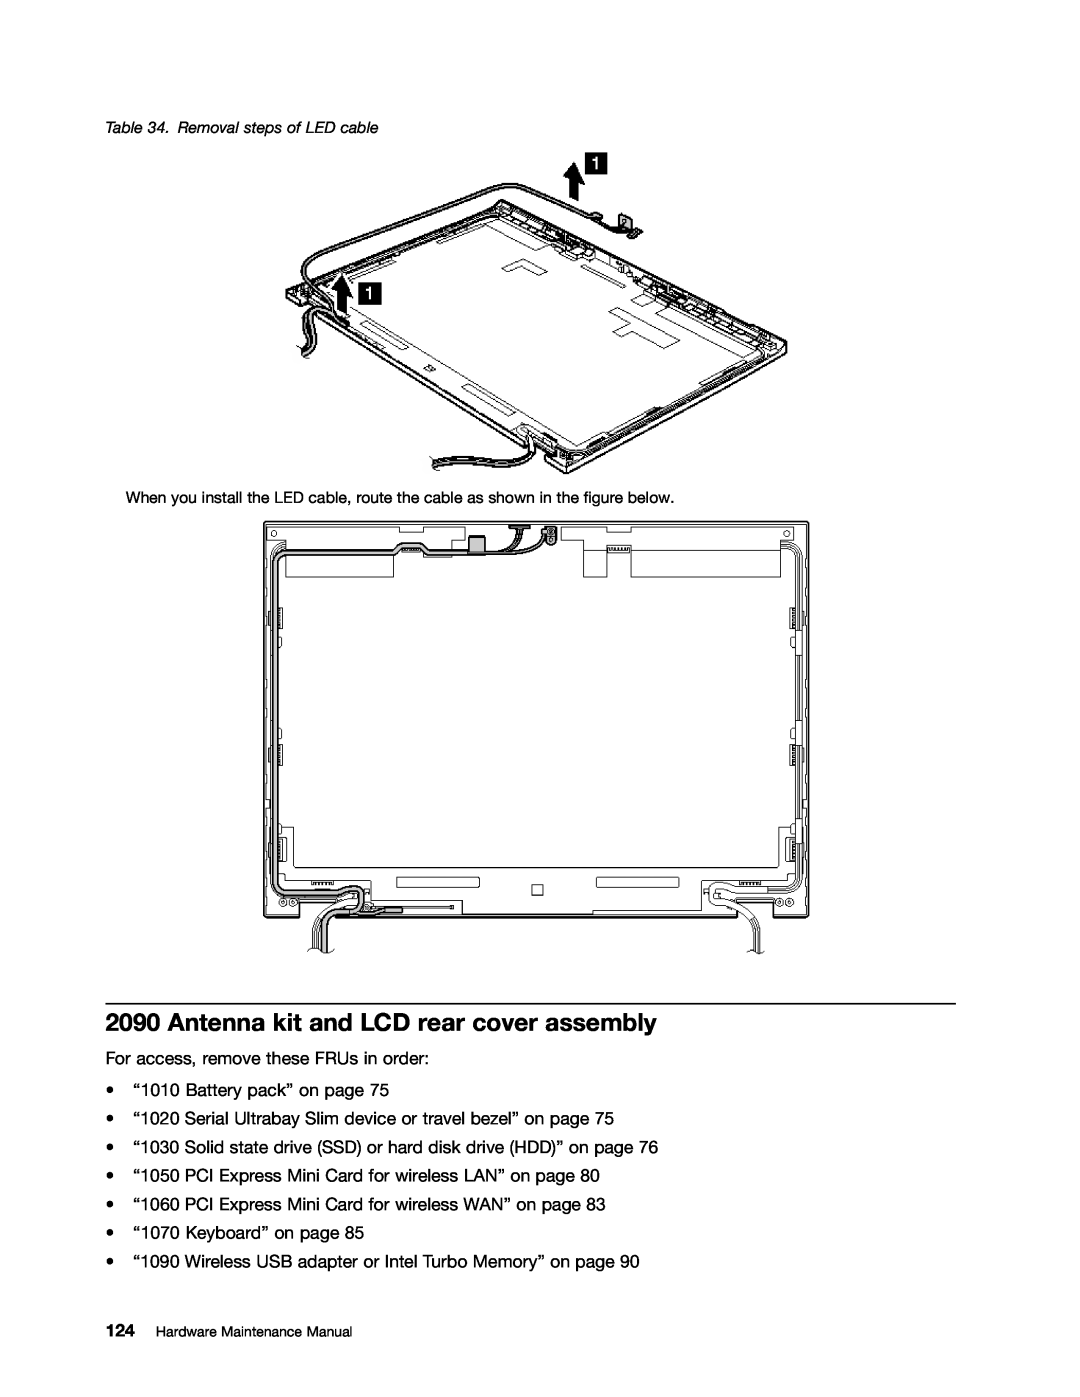 IBM T400S, T410SI manual Antenna kit and LCD rear cover assembly, Removal steps of LED cable 